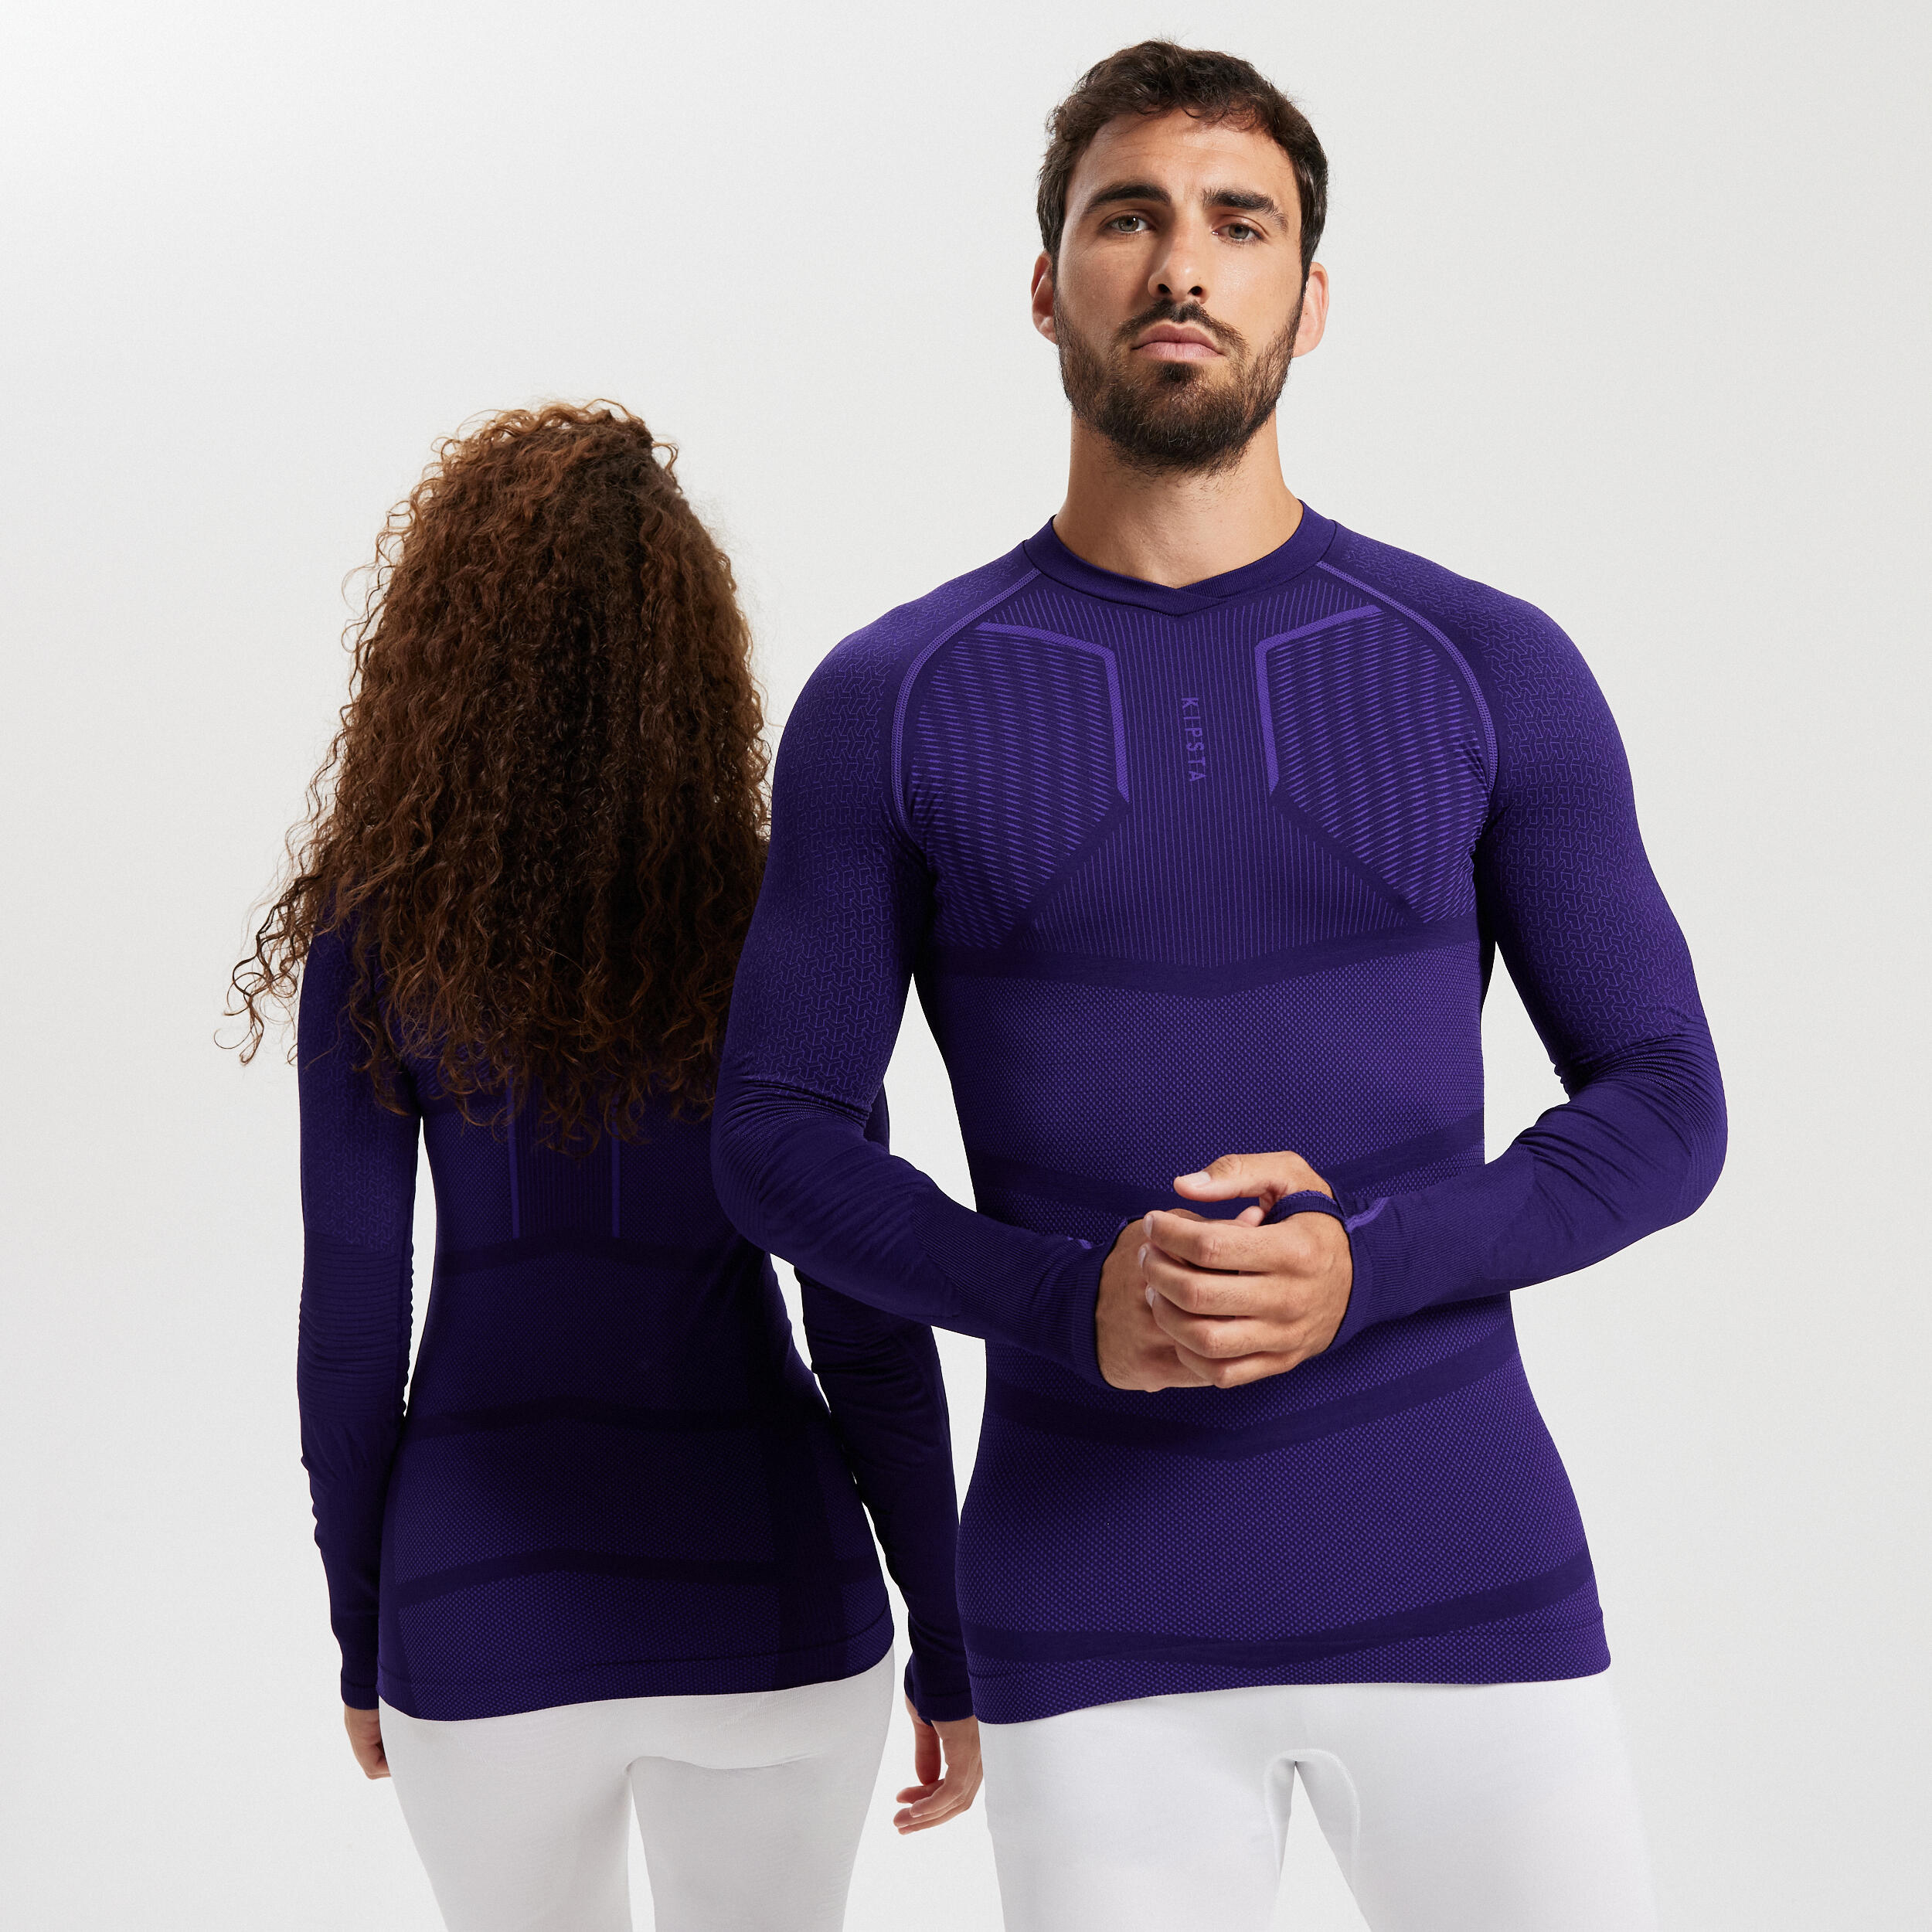 Adult Long-Sleeved Thermal Base Layer Top Keepdry 500 - Purple 3/15